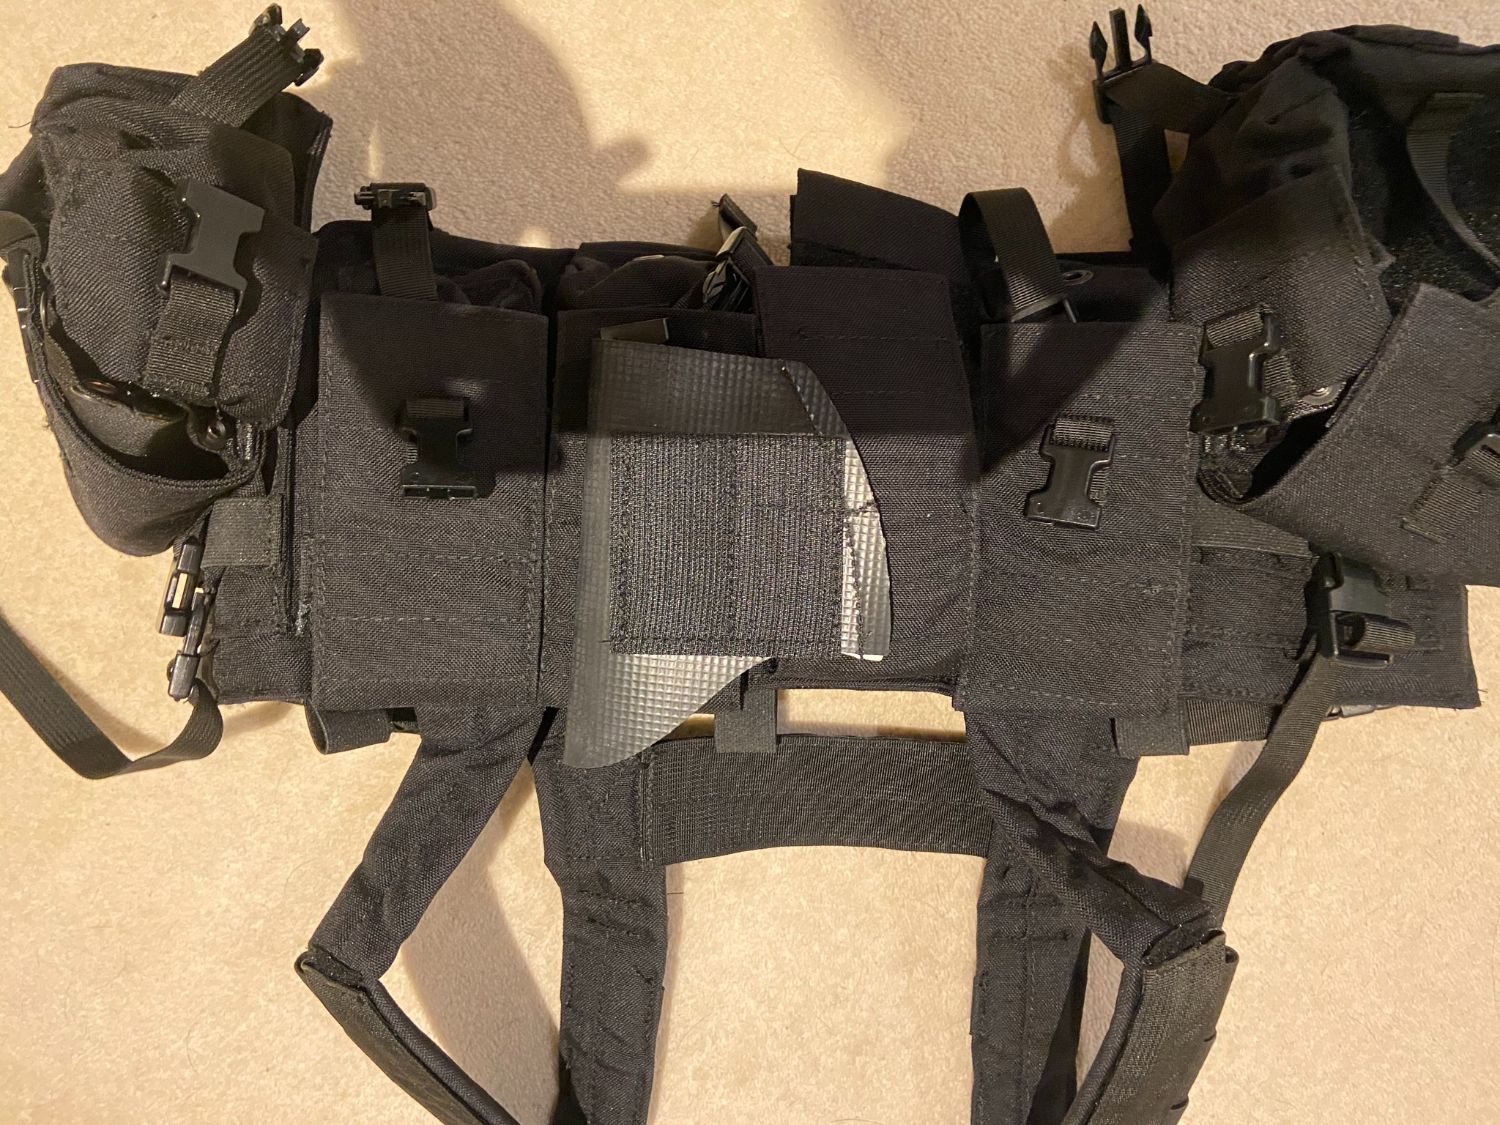 LBT-1961A Black chest rig - Gear - Airsoft Forums UK